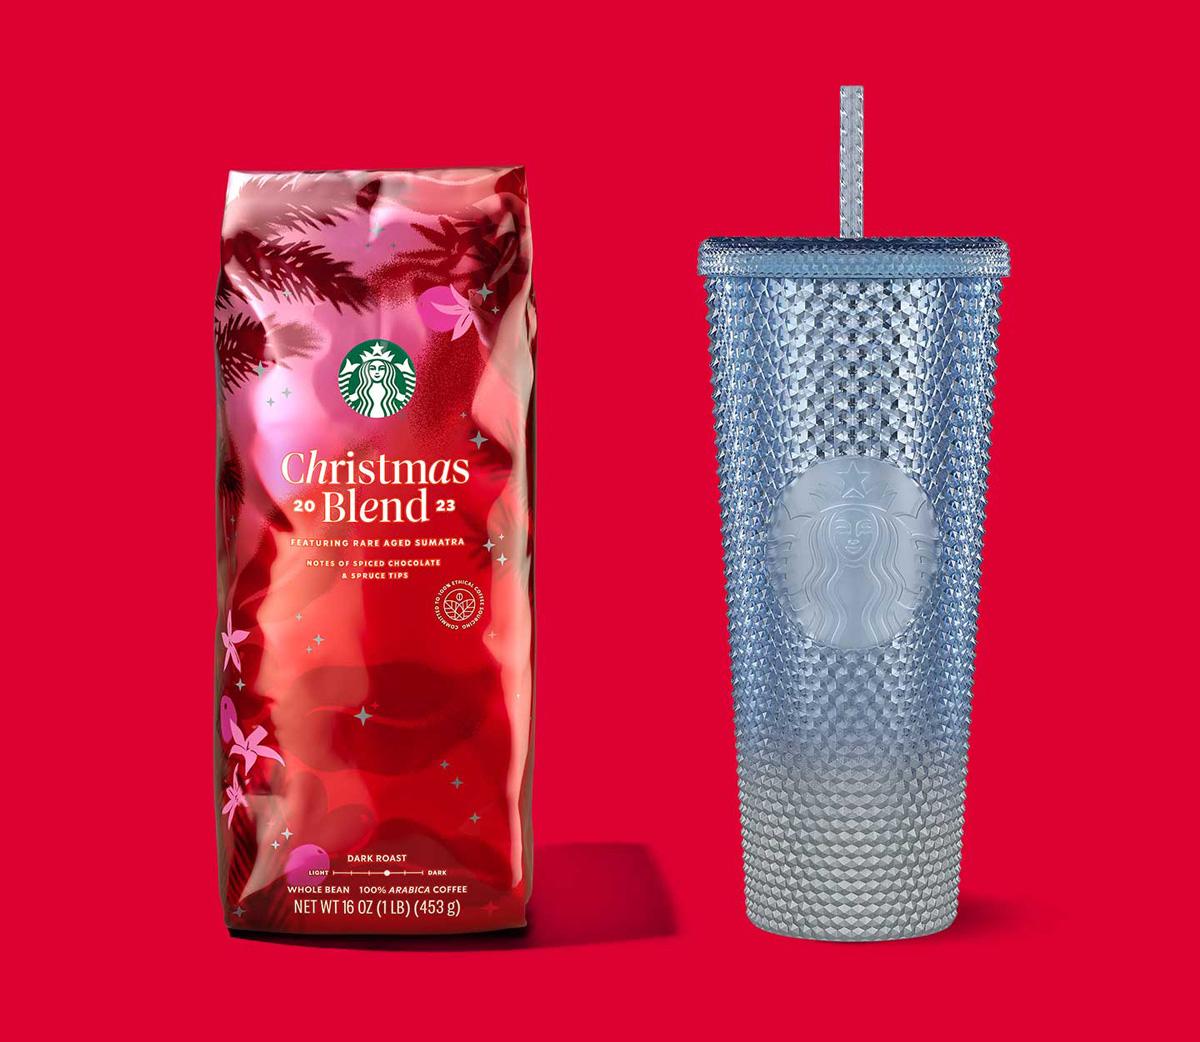 Starbucks Merchandise on Clearance for 50% Off